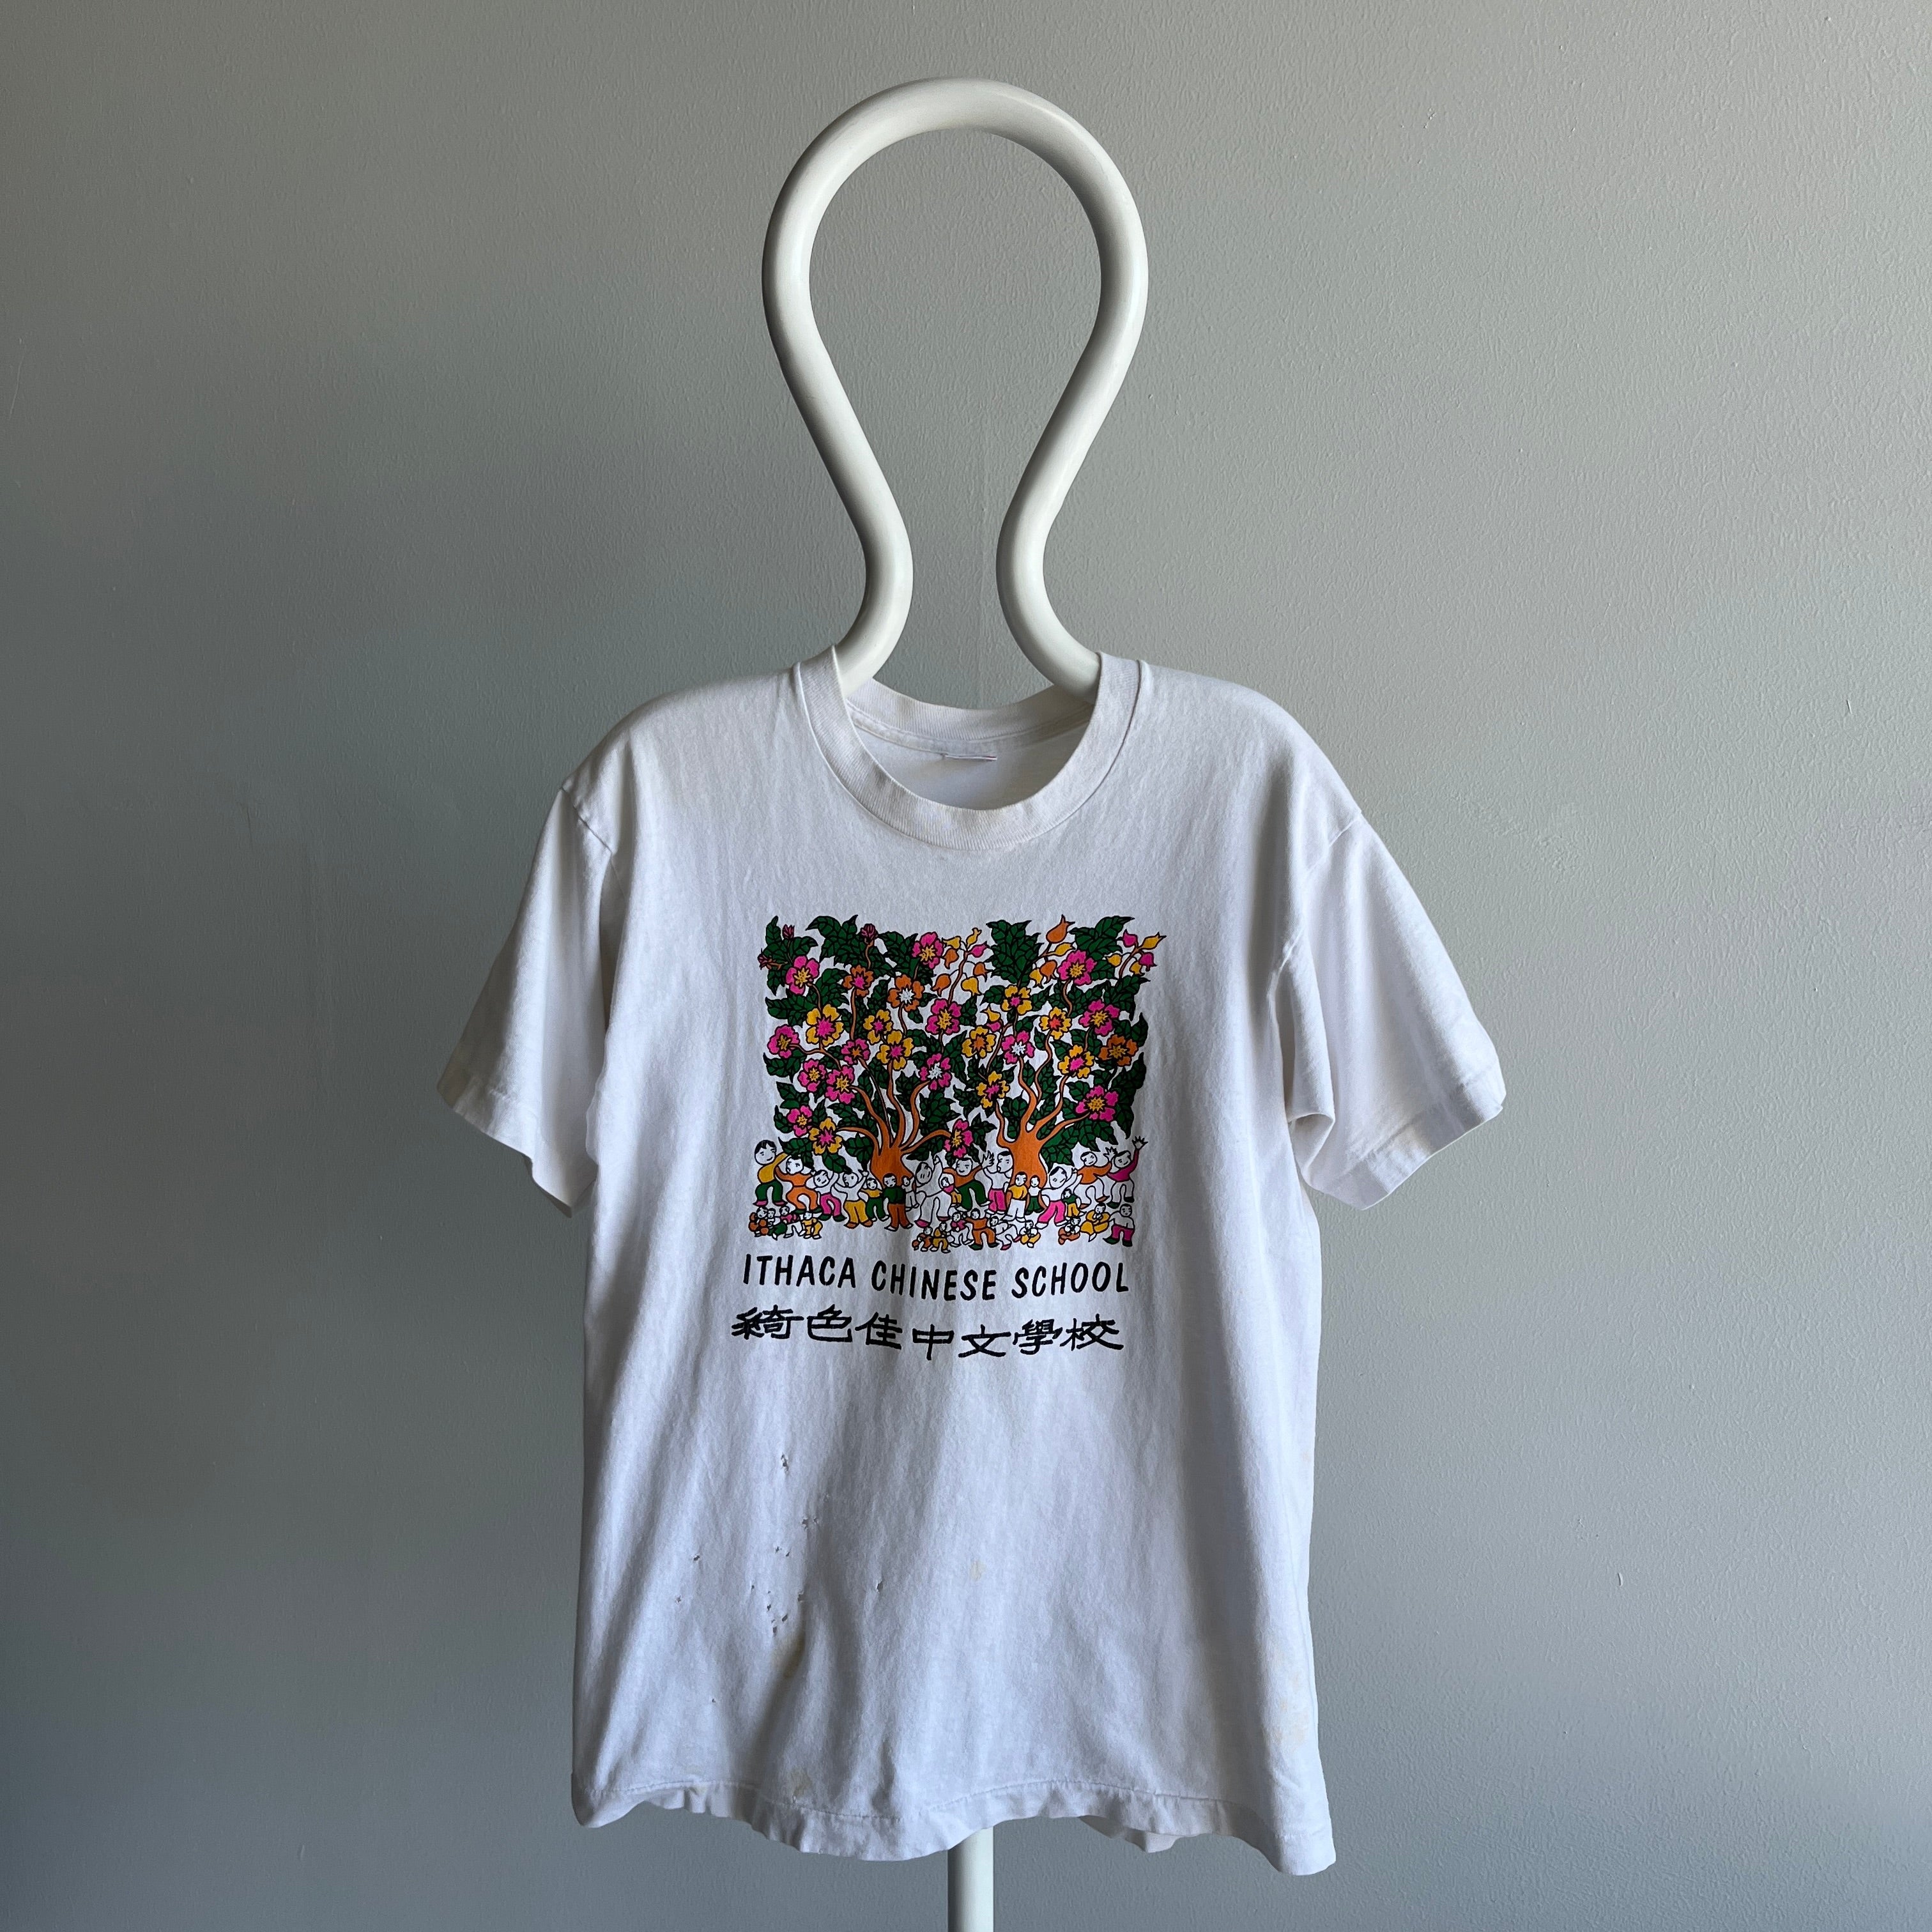 1980s Ithaca Chinese School Destroyed T-Shirt (Personal Collection Piece)